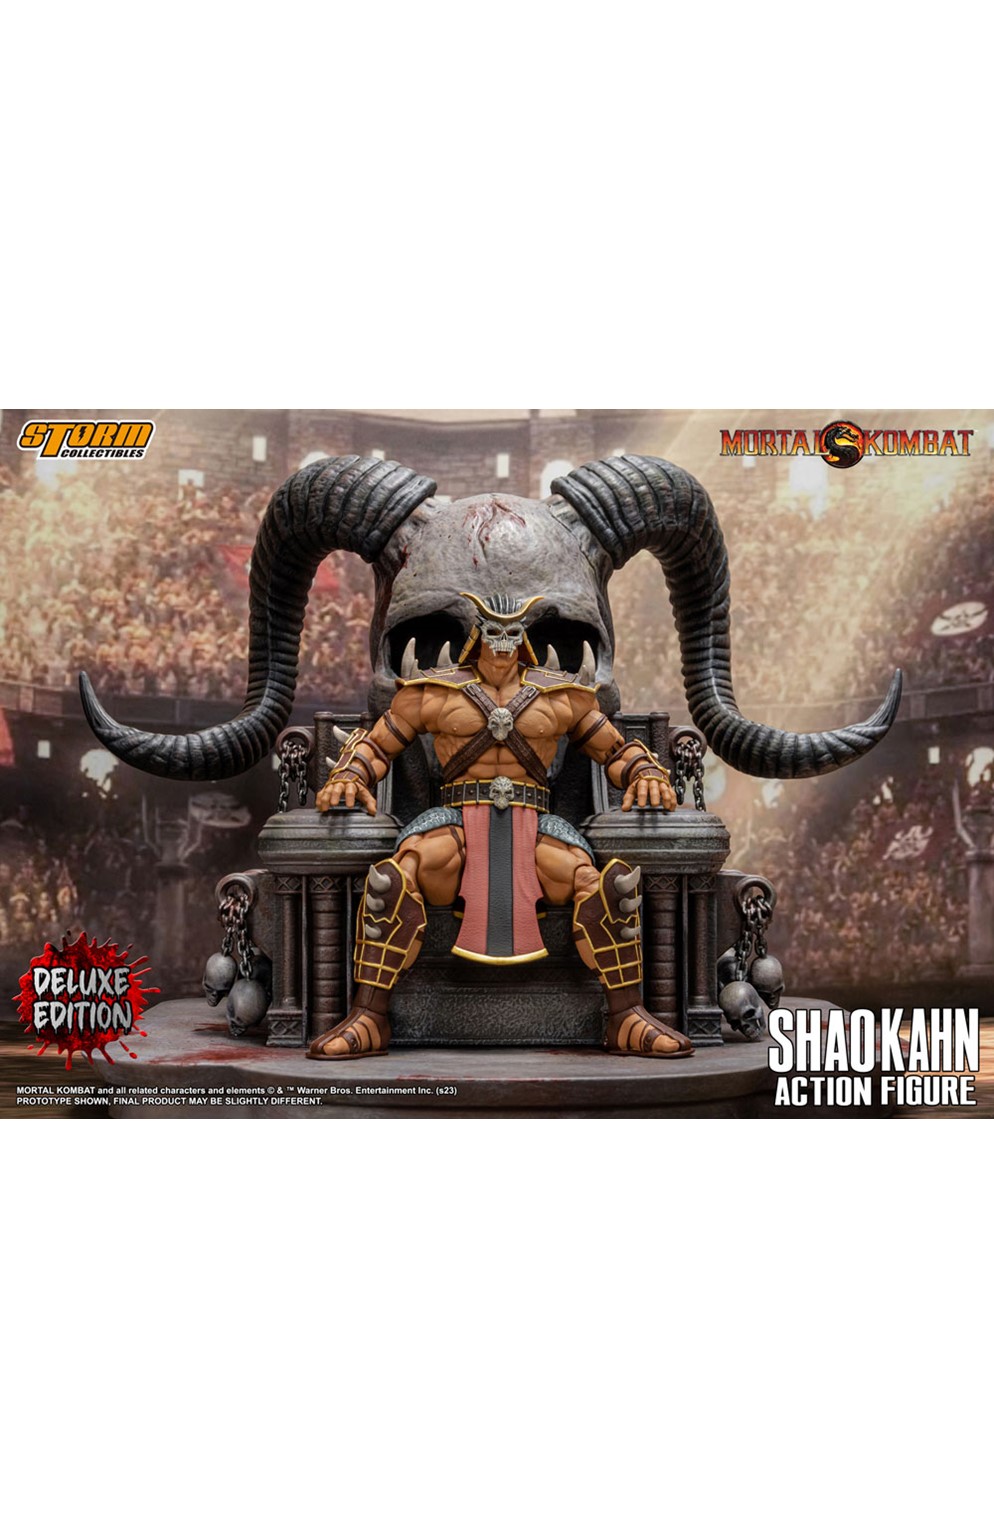 ***Pre-Order*** Storm Collectibles Mortal Kombat 1/12 Shao Kahn Deluxe Edition